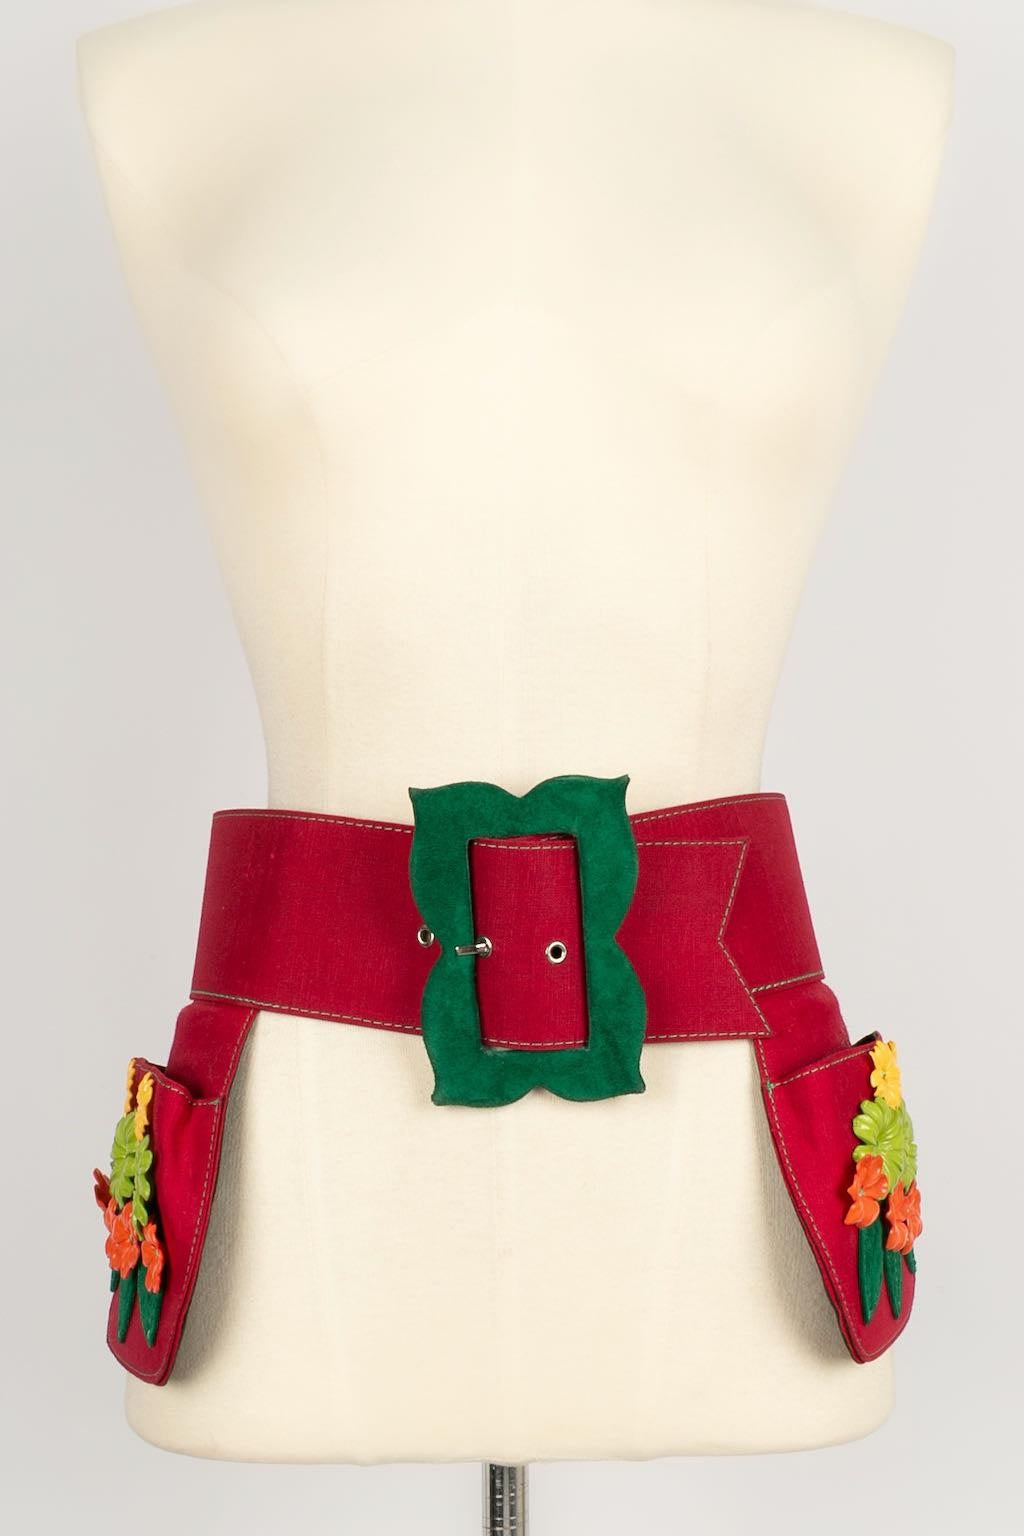 Chantal Thomass - Black leather and red cotton belt with flower embroidered pockets and a green suede buckle. Spring-Summer 1993 fashion show.

Additional information:
Condition: Very good condition
Dimensions: Length: from 65 cm to 70 cm - Maximum